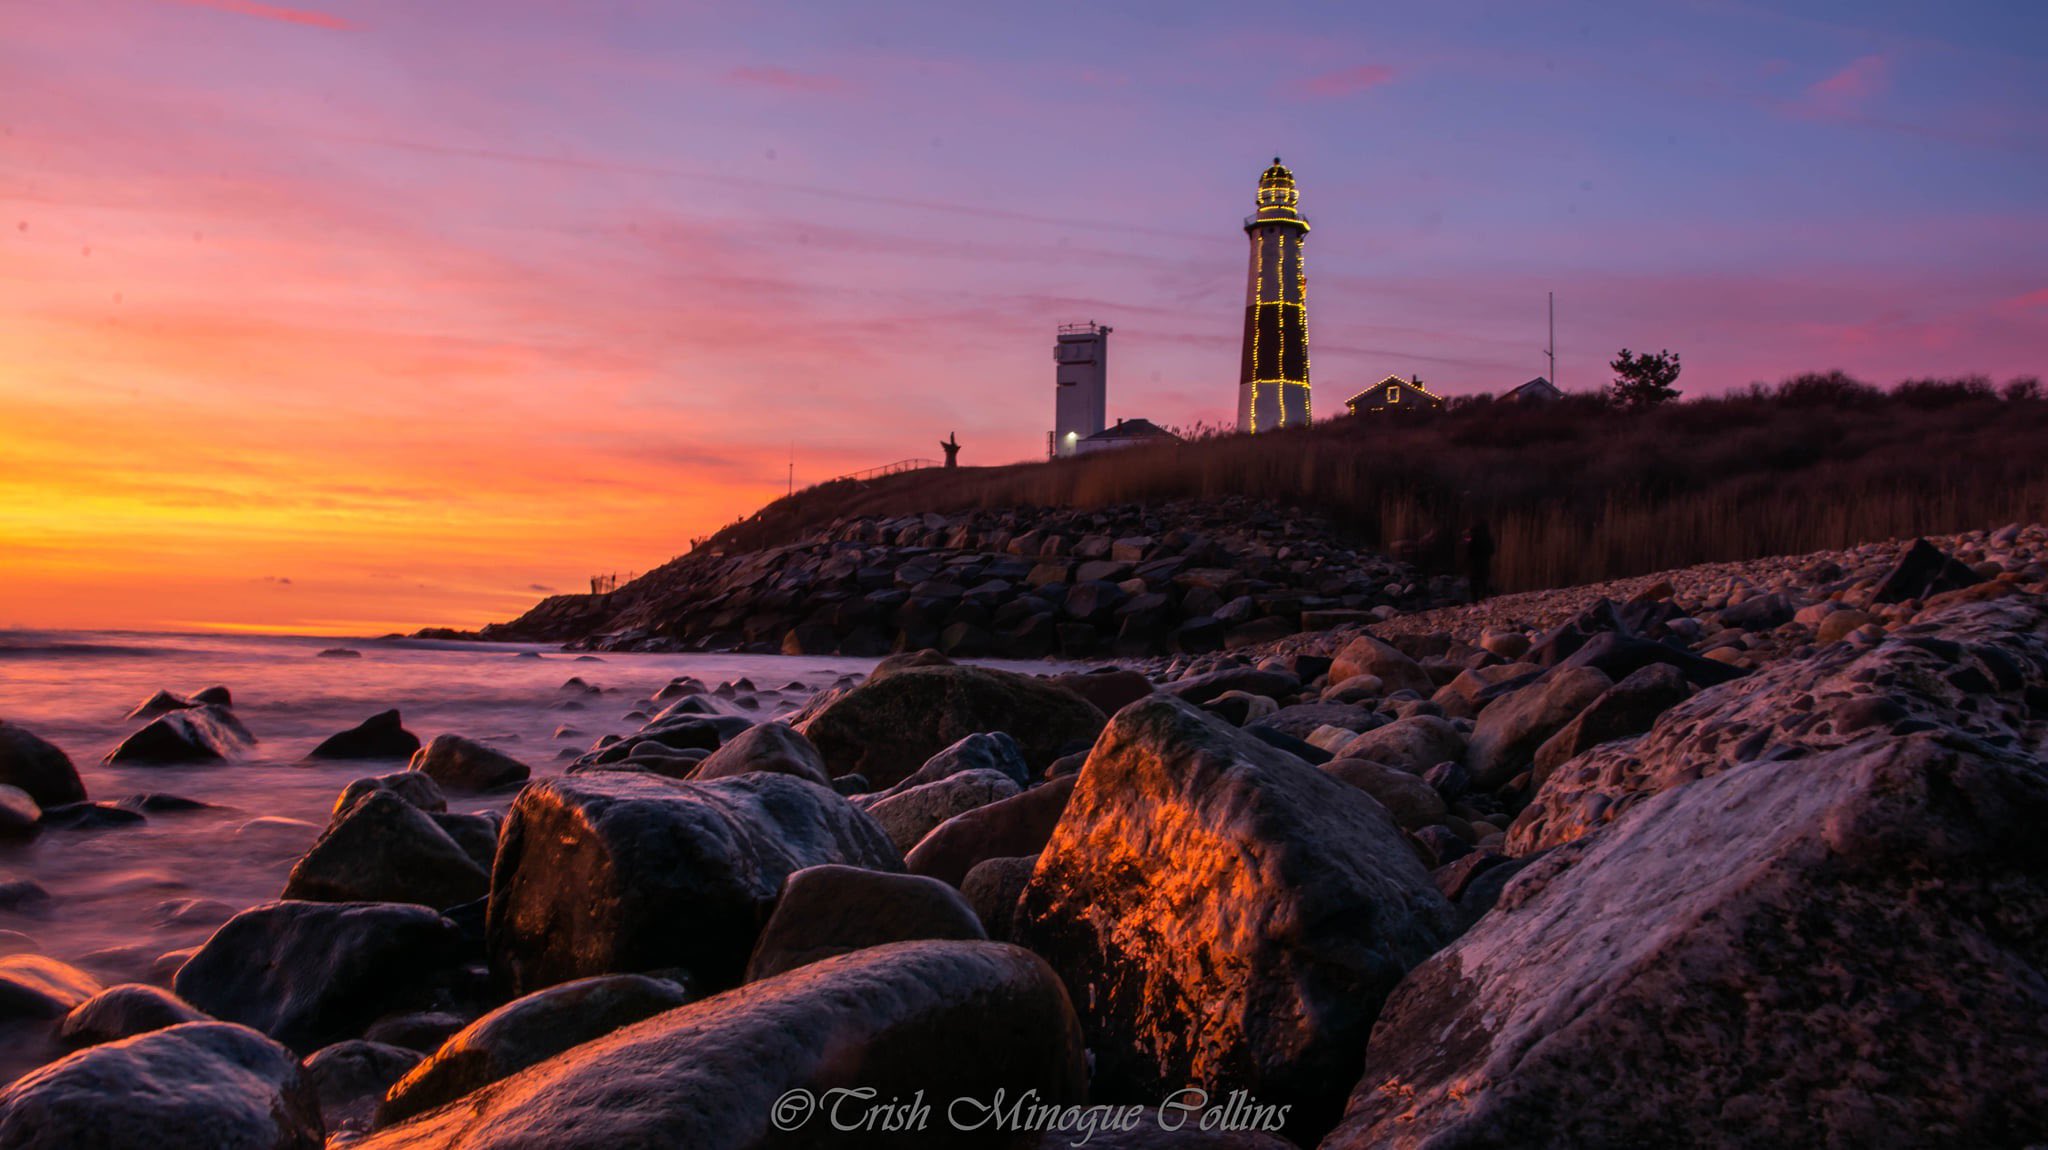 Montauk lighthouse in holiday lights by Trish MinogueCollins @TrishMinogPhoto